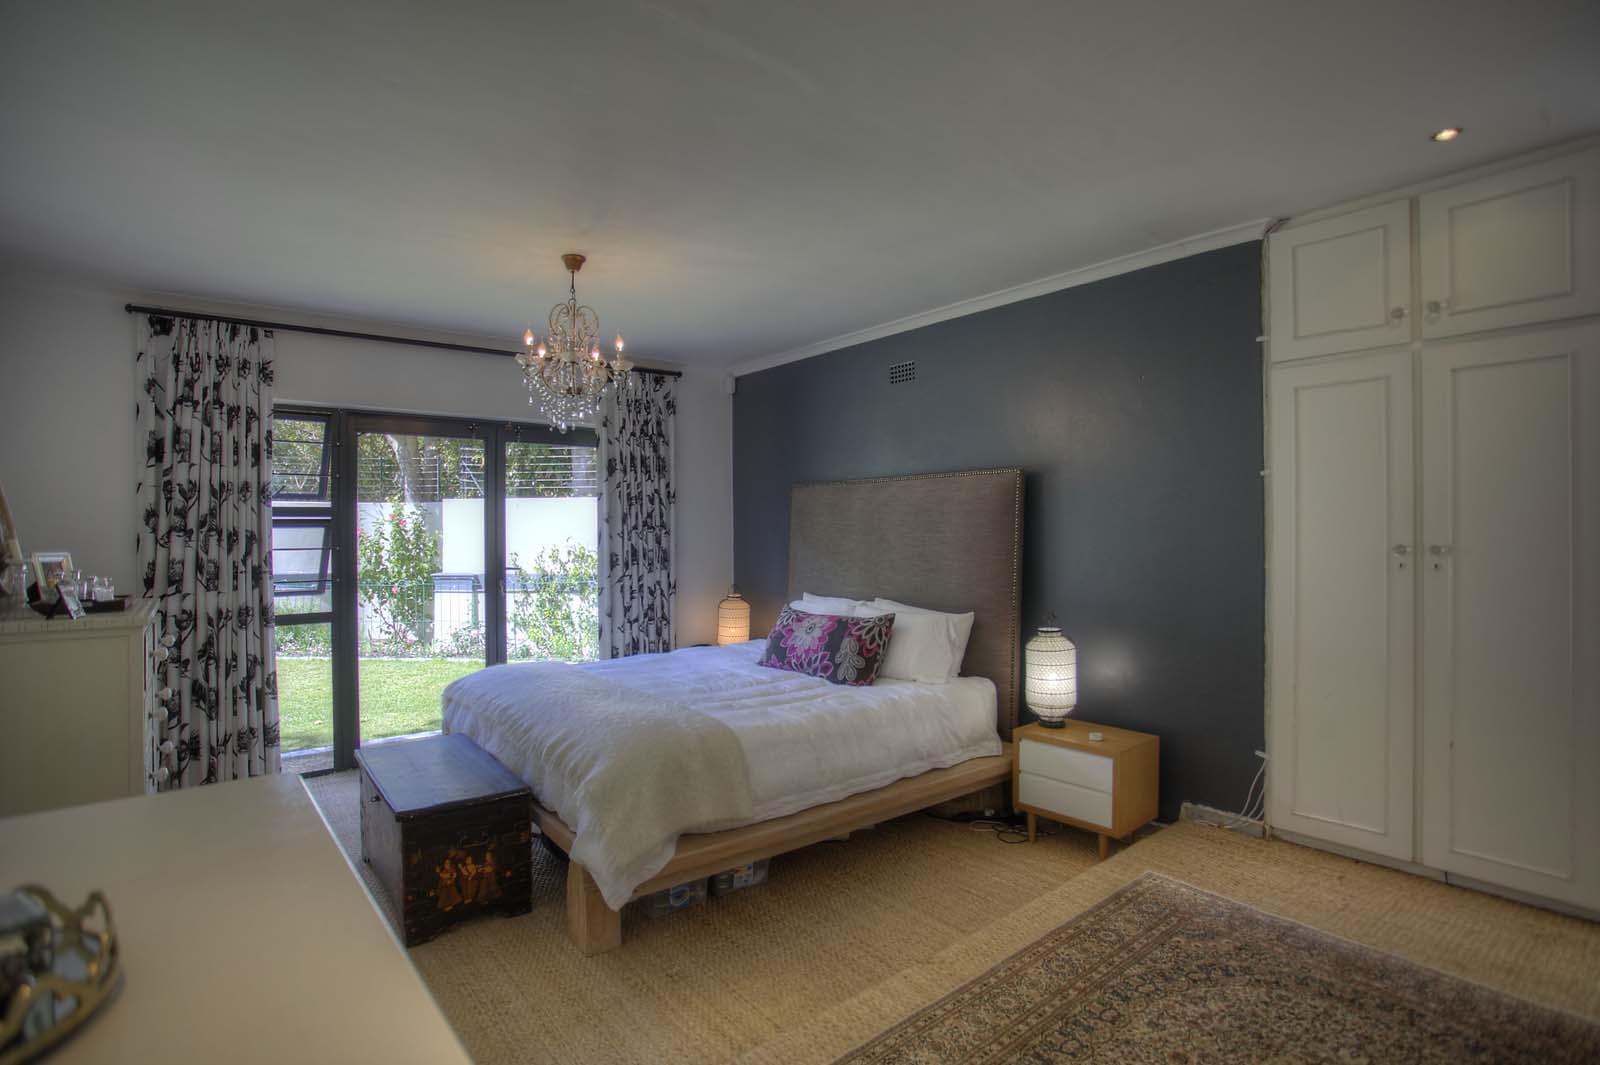 Photo 2 of Villa Robertson accommodation in Constantia, Cape Town with 4 bedrooms and 3 bathrooms